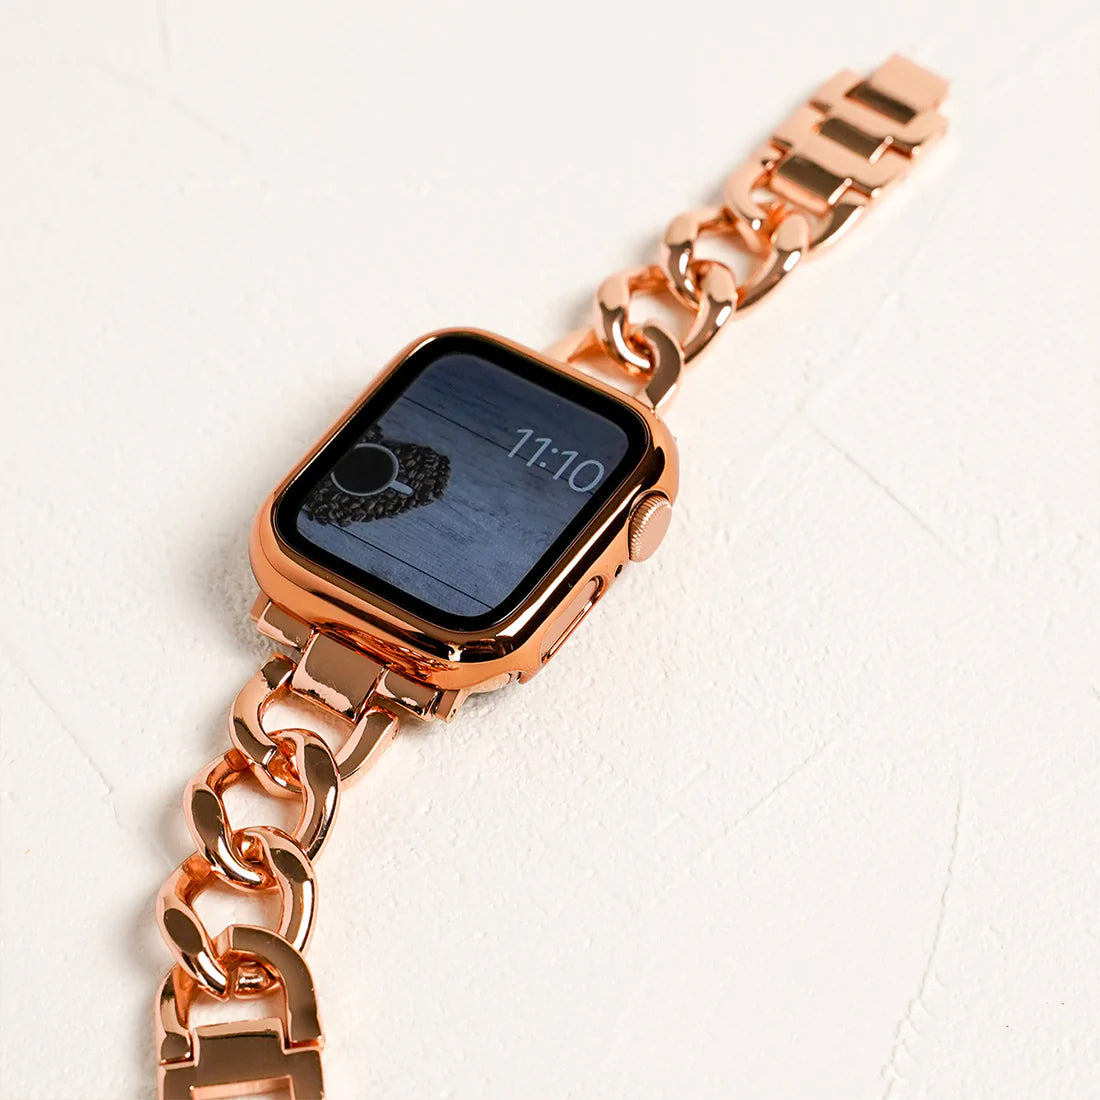 Double Chain Link Stainless Steel Metal Chanel Style Apple Watch